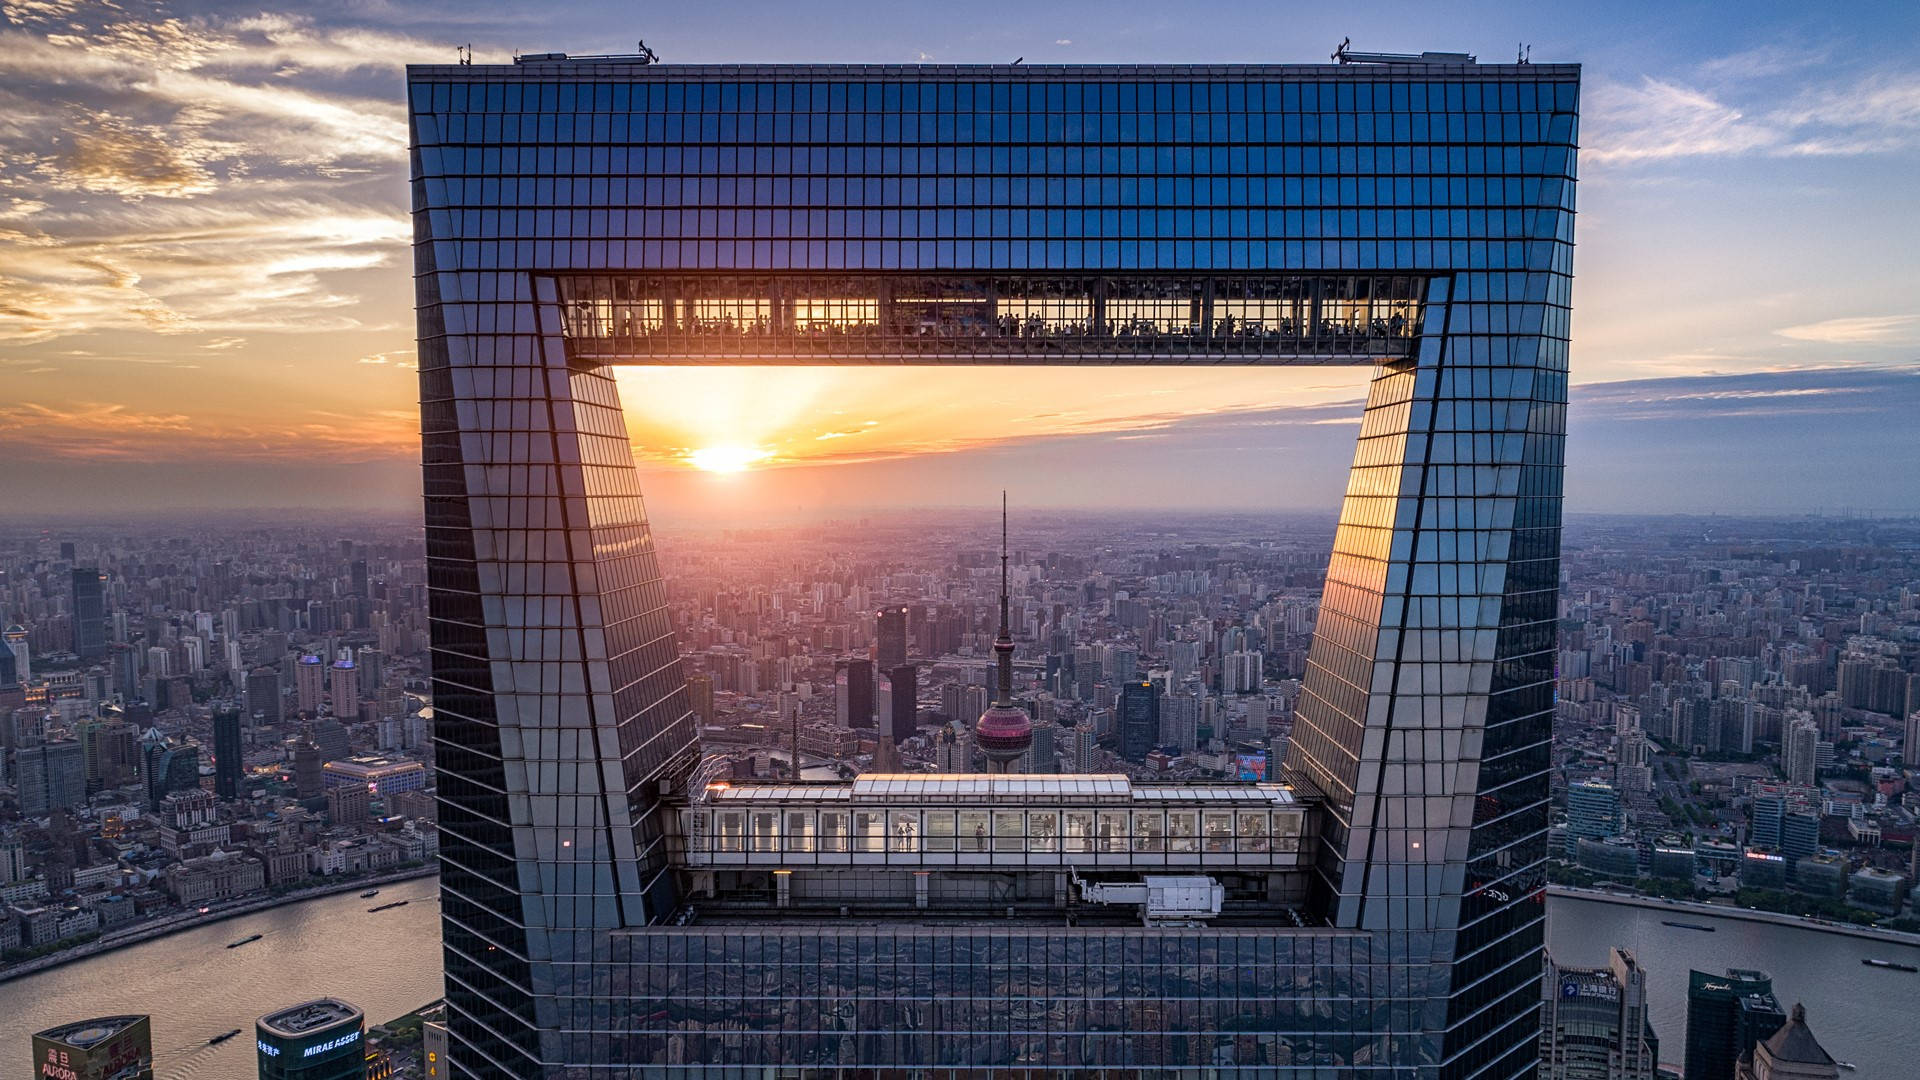 Shanghaiworld Financial Center Is Translated To German As 